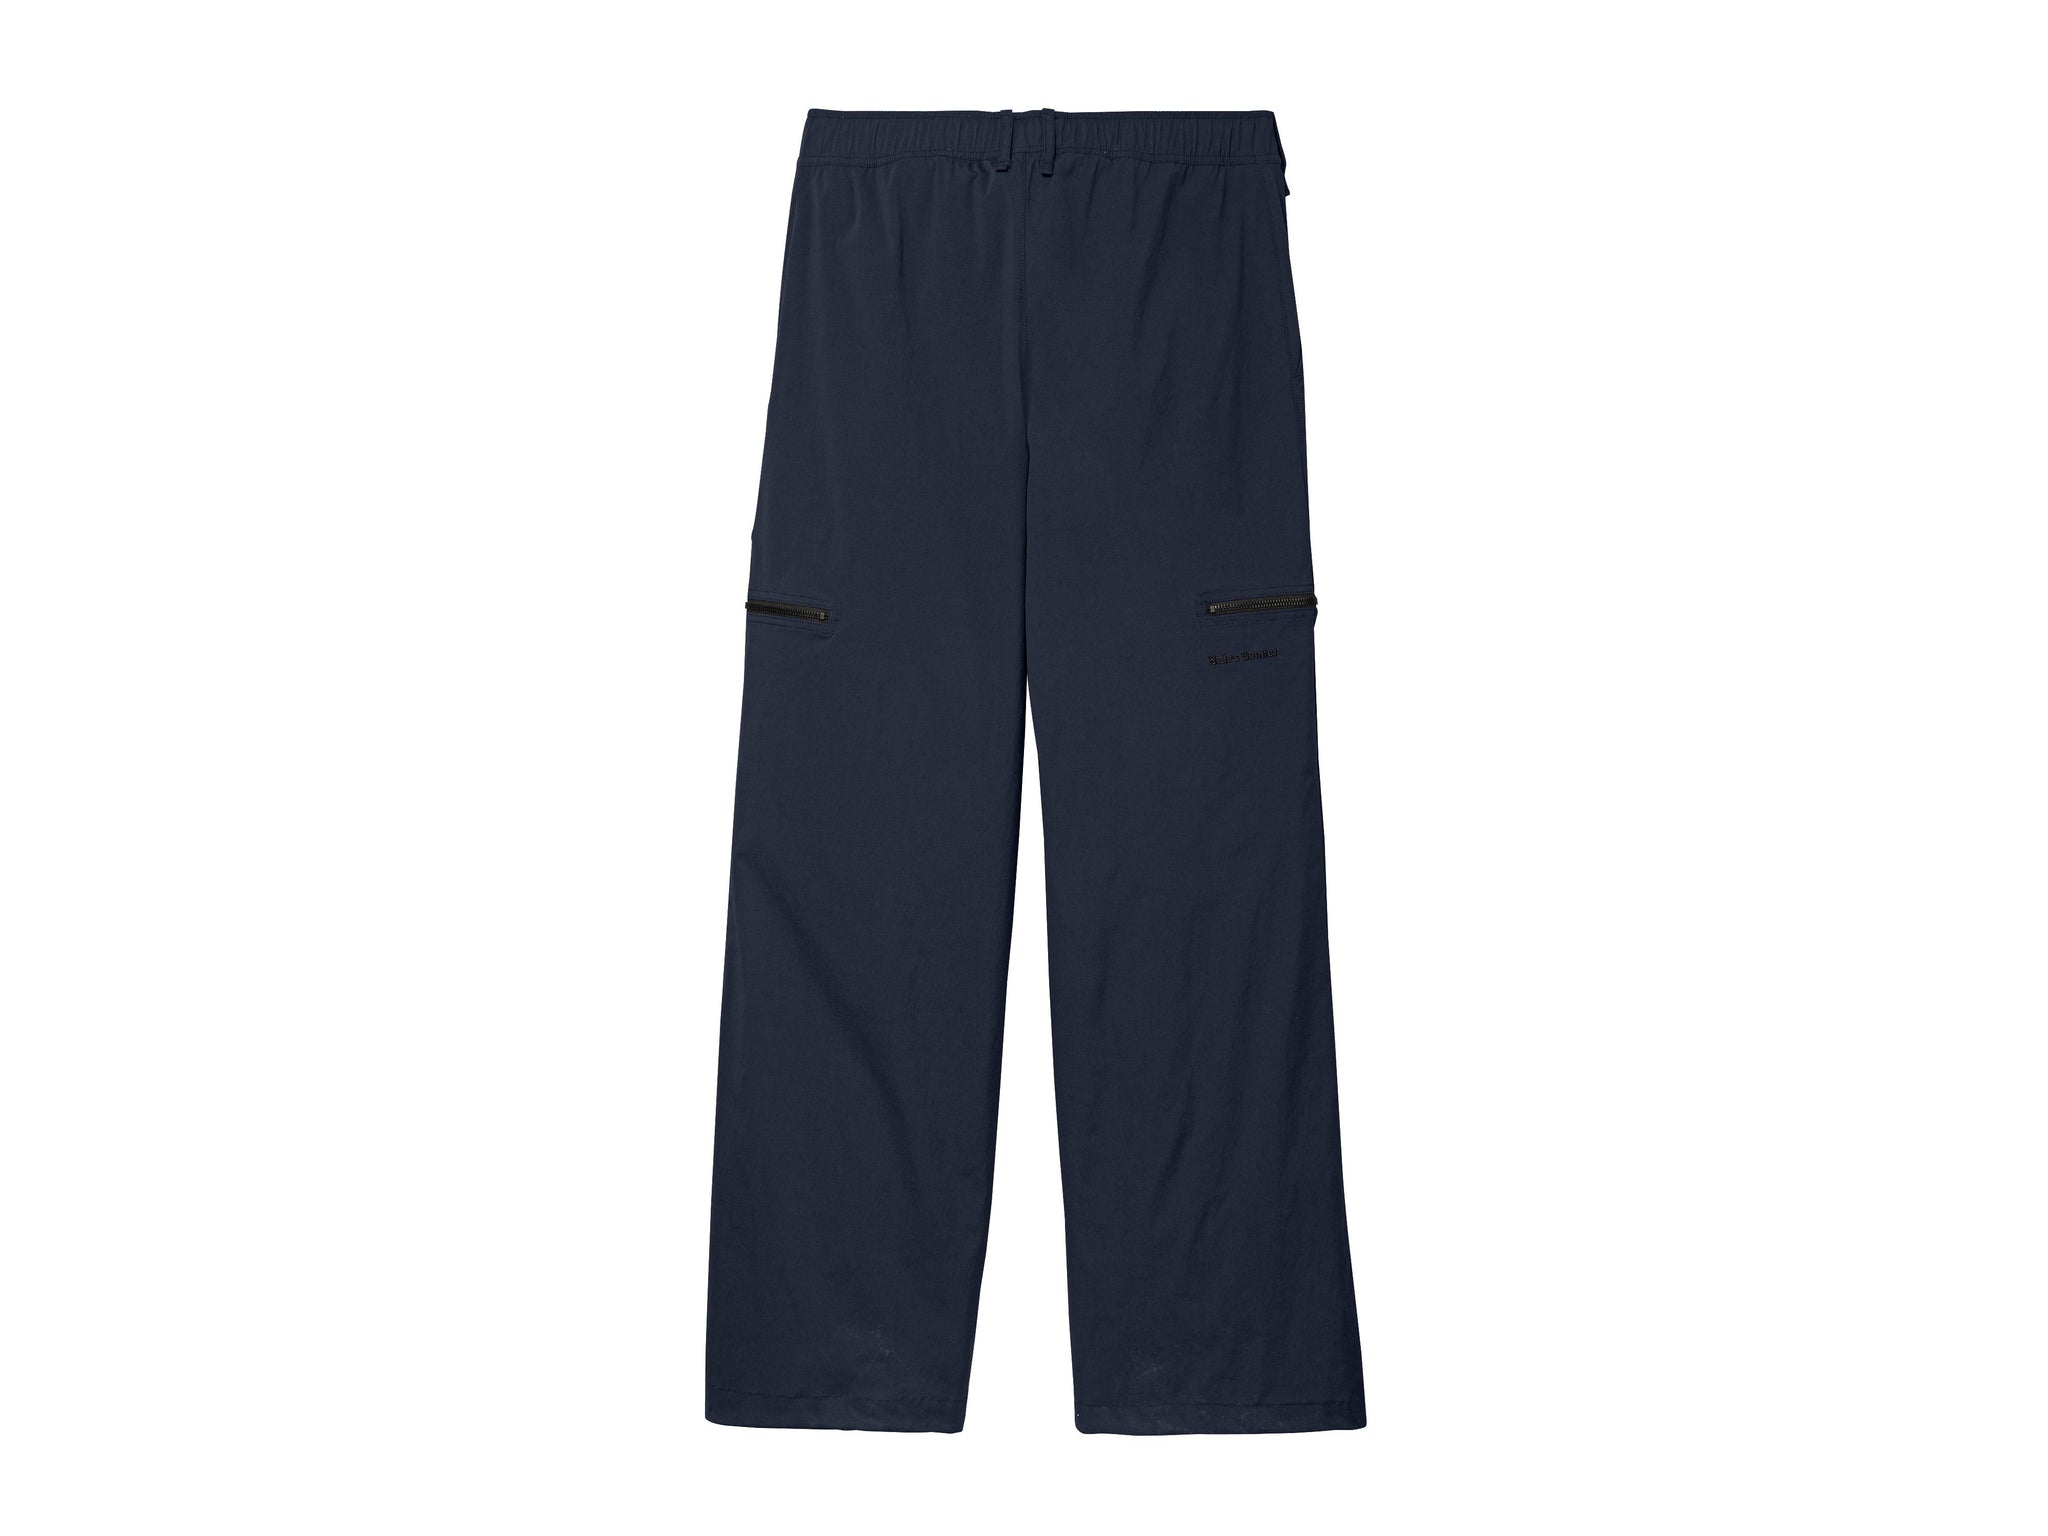 adidas x Wales Bonner Statement Cargo Pant - Navy - Due West